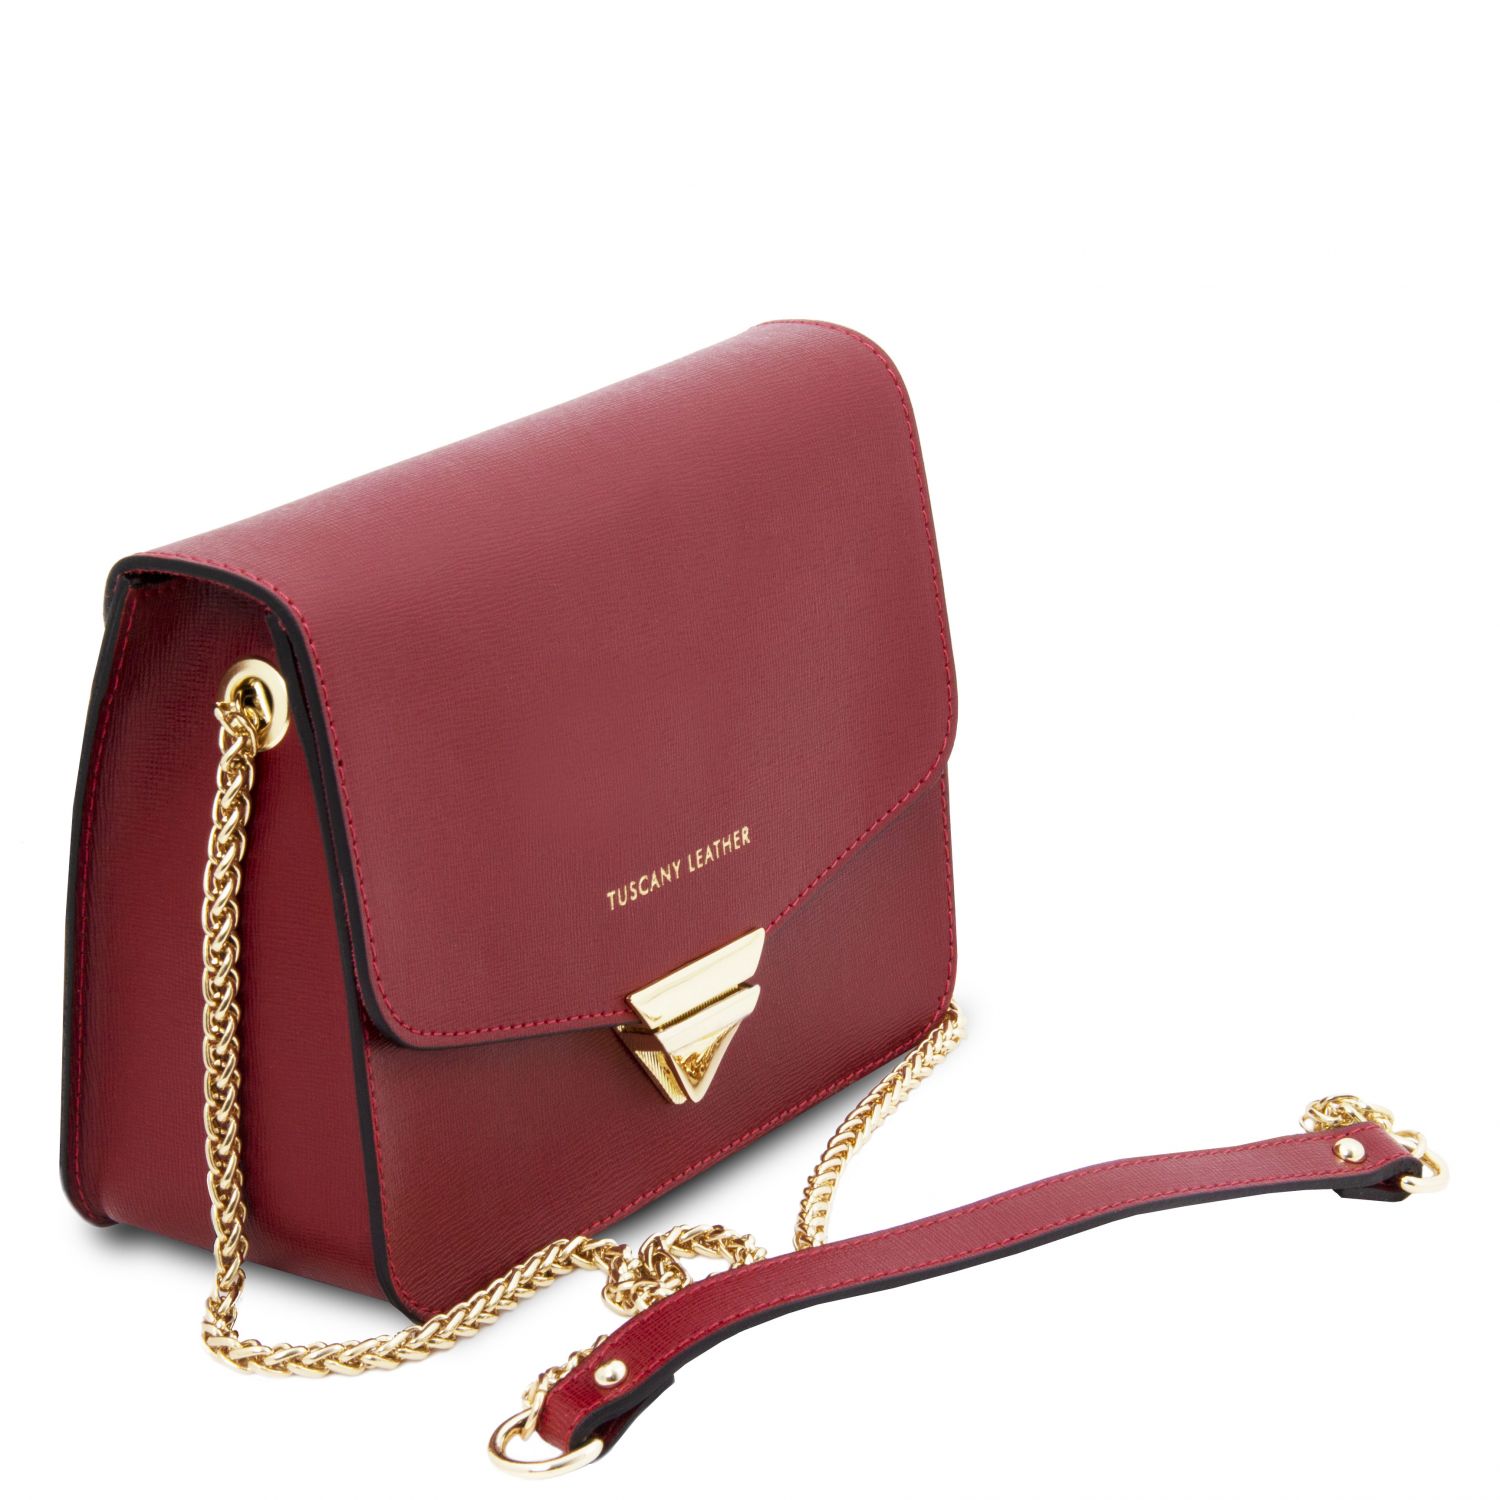 TL Bag Saffiano Leather Clutch With Chain Strap Фиолетовый 